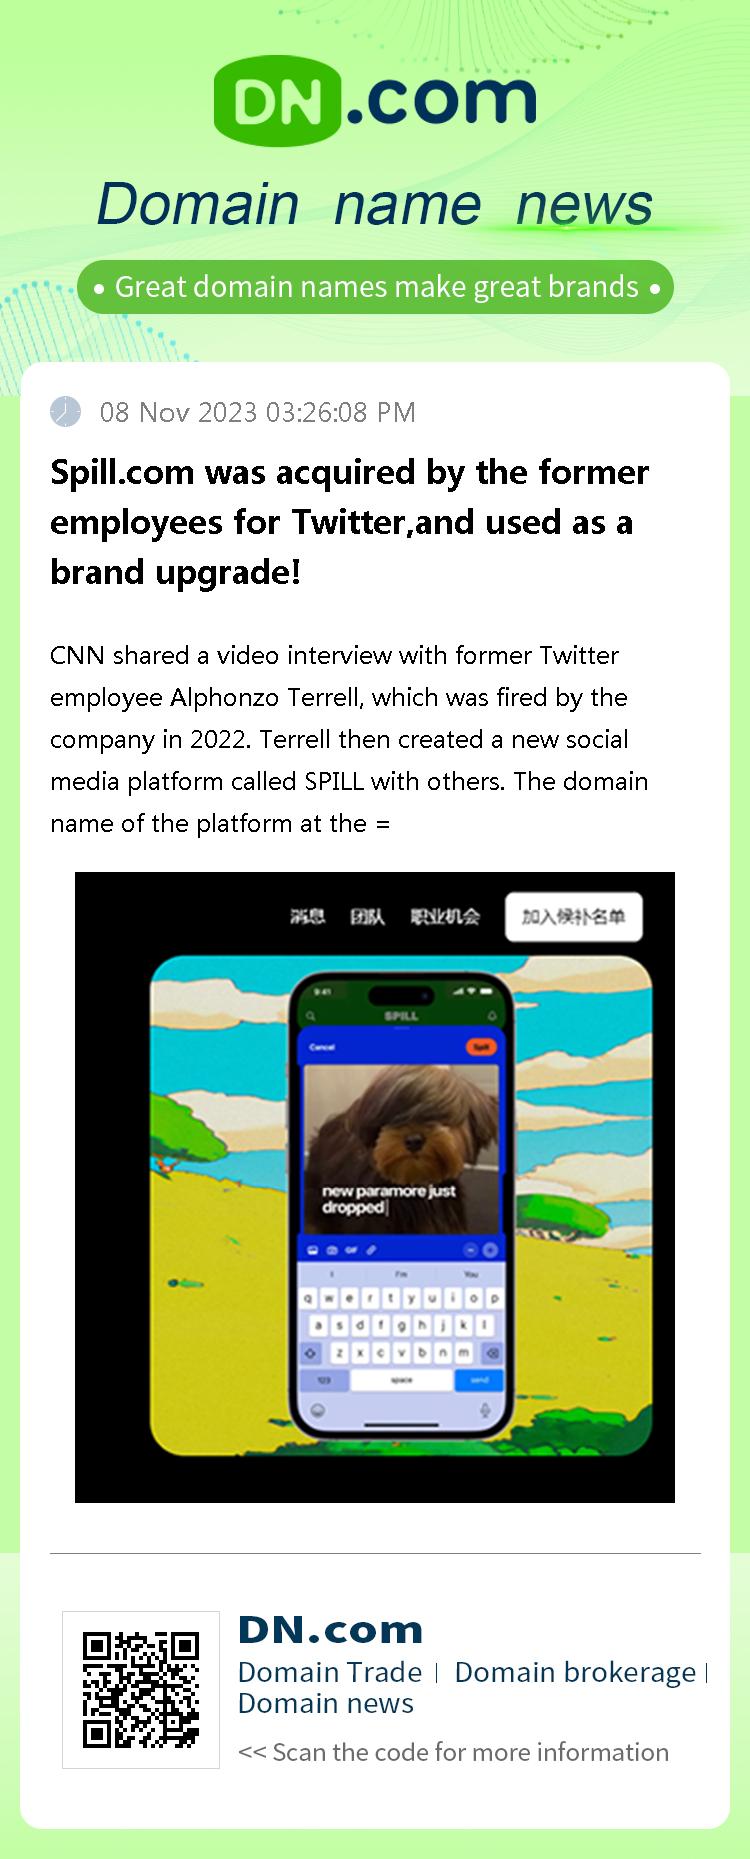 Spill.com was acquired by the former employees for Twitter,and used as a brand upgrade!